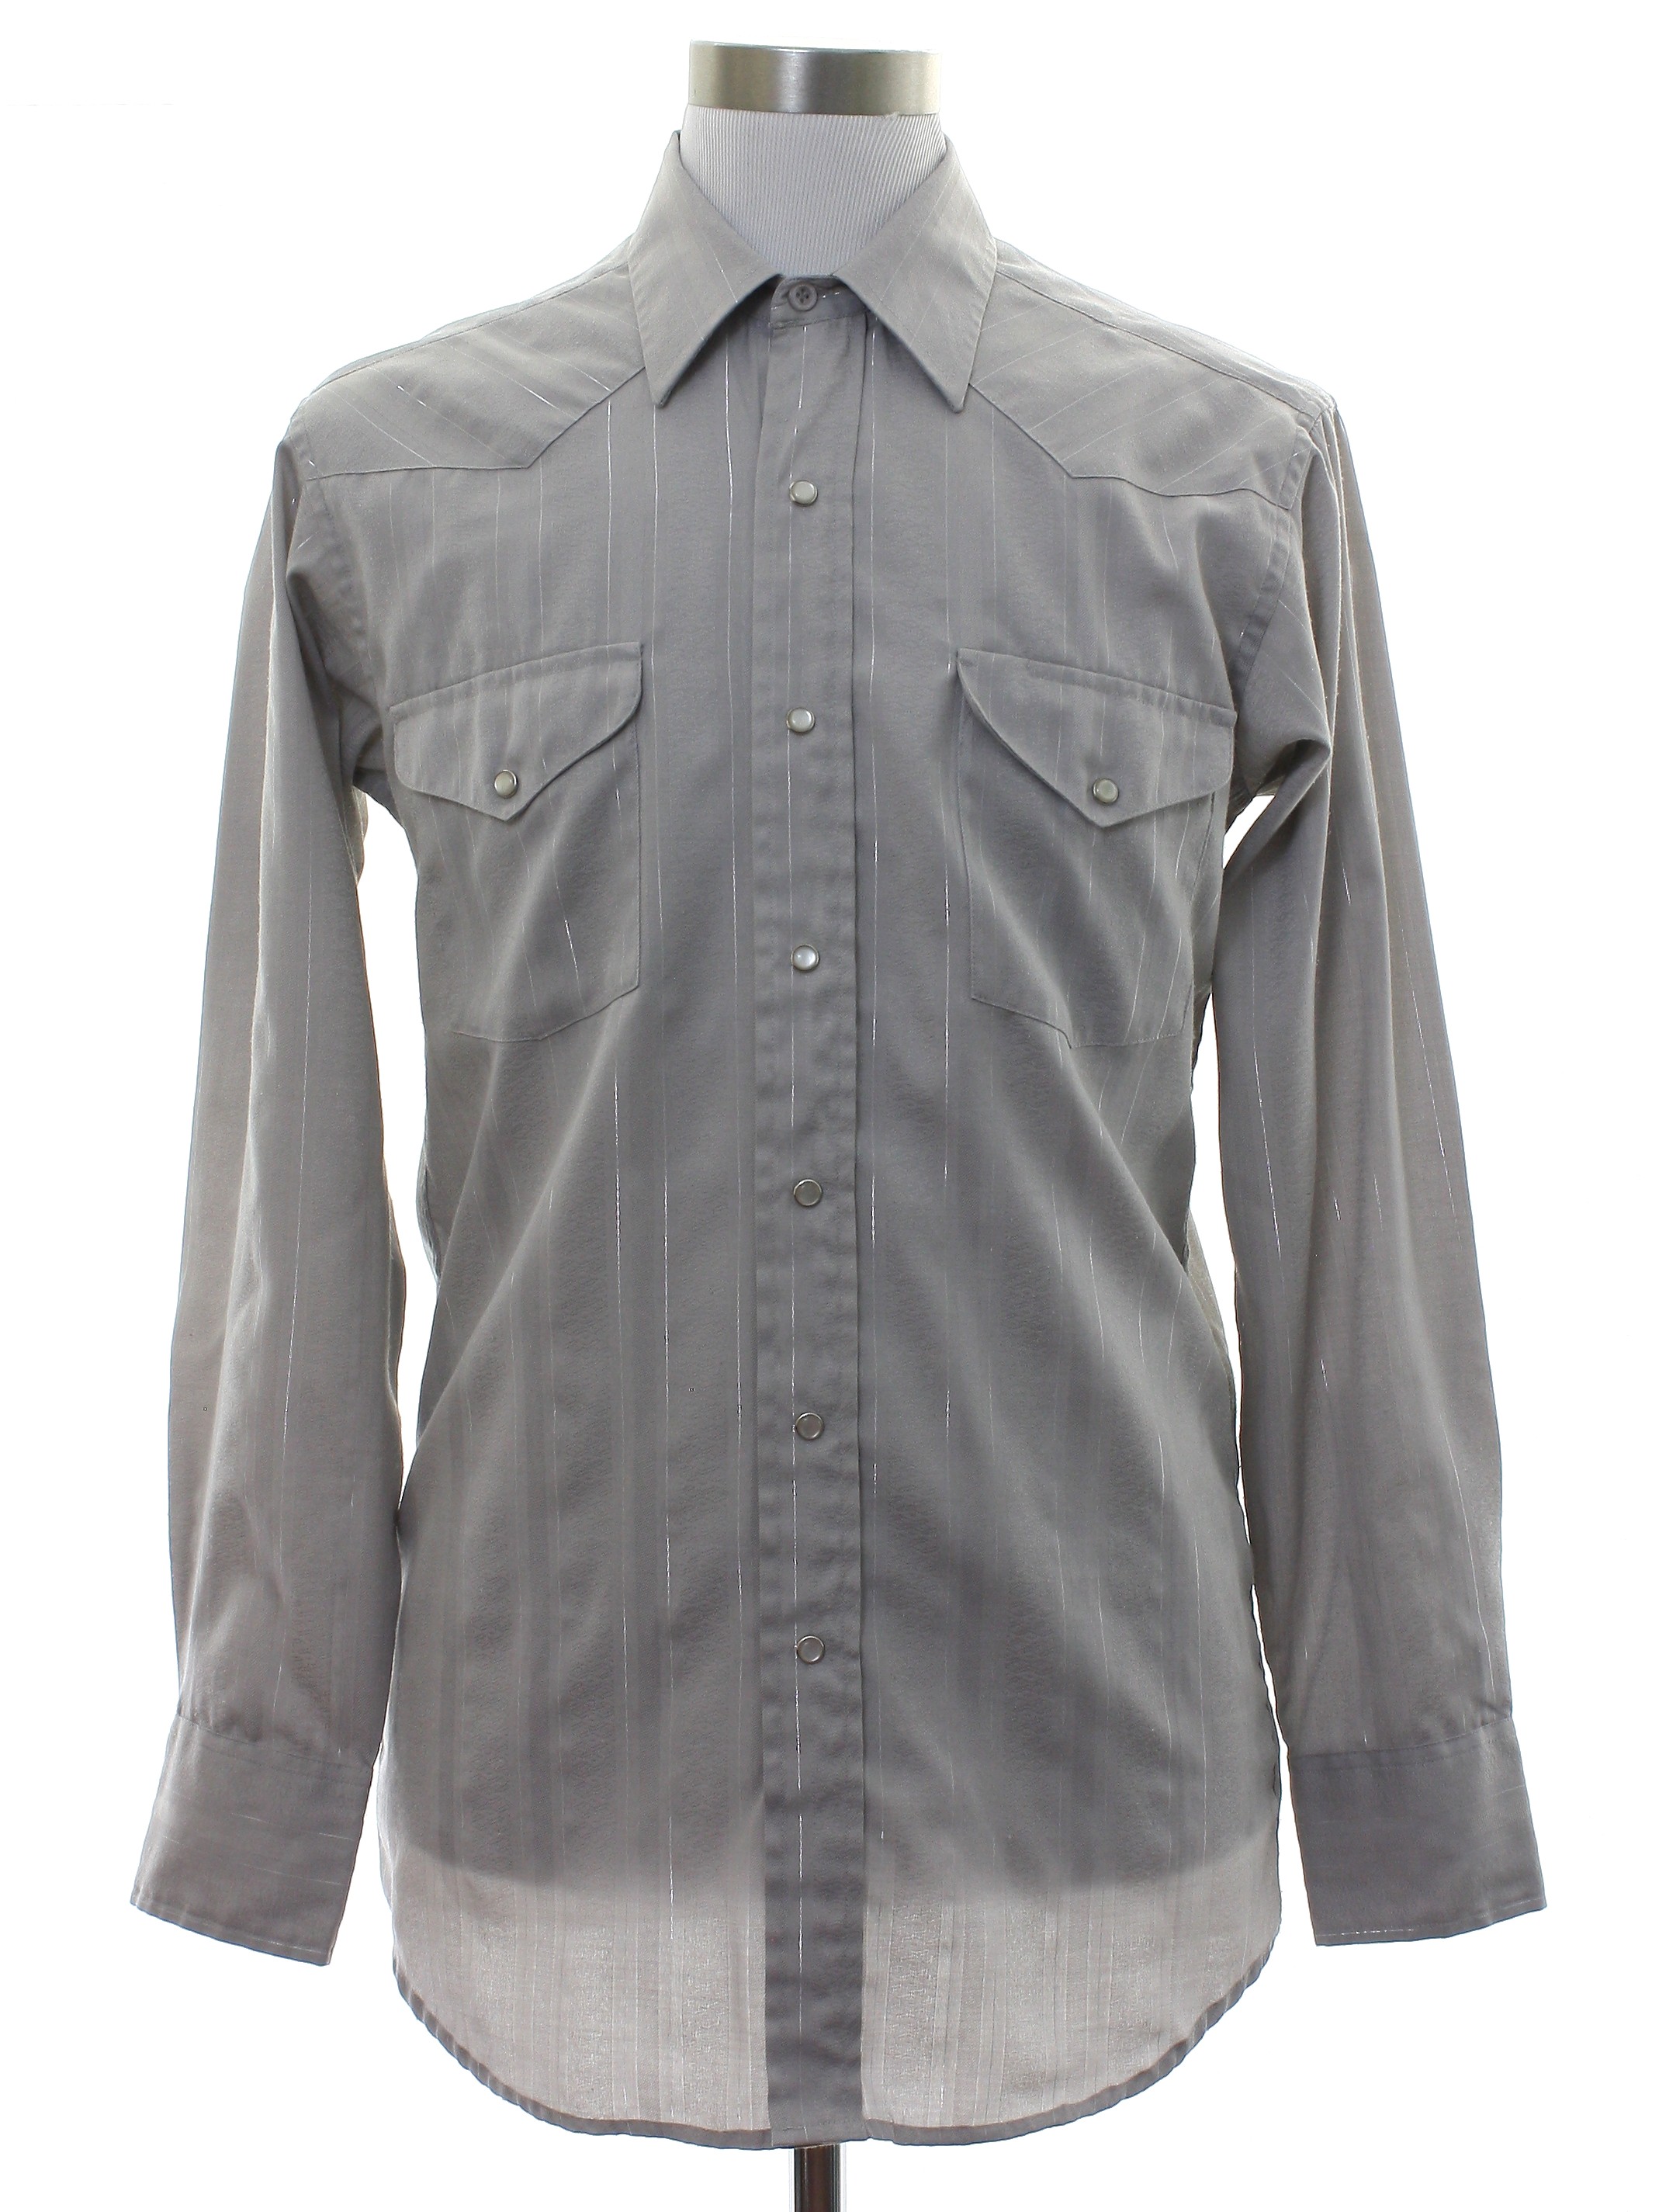 Western Shirt: 90s -Panhandle Slim- Mens gray background polyester ...